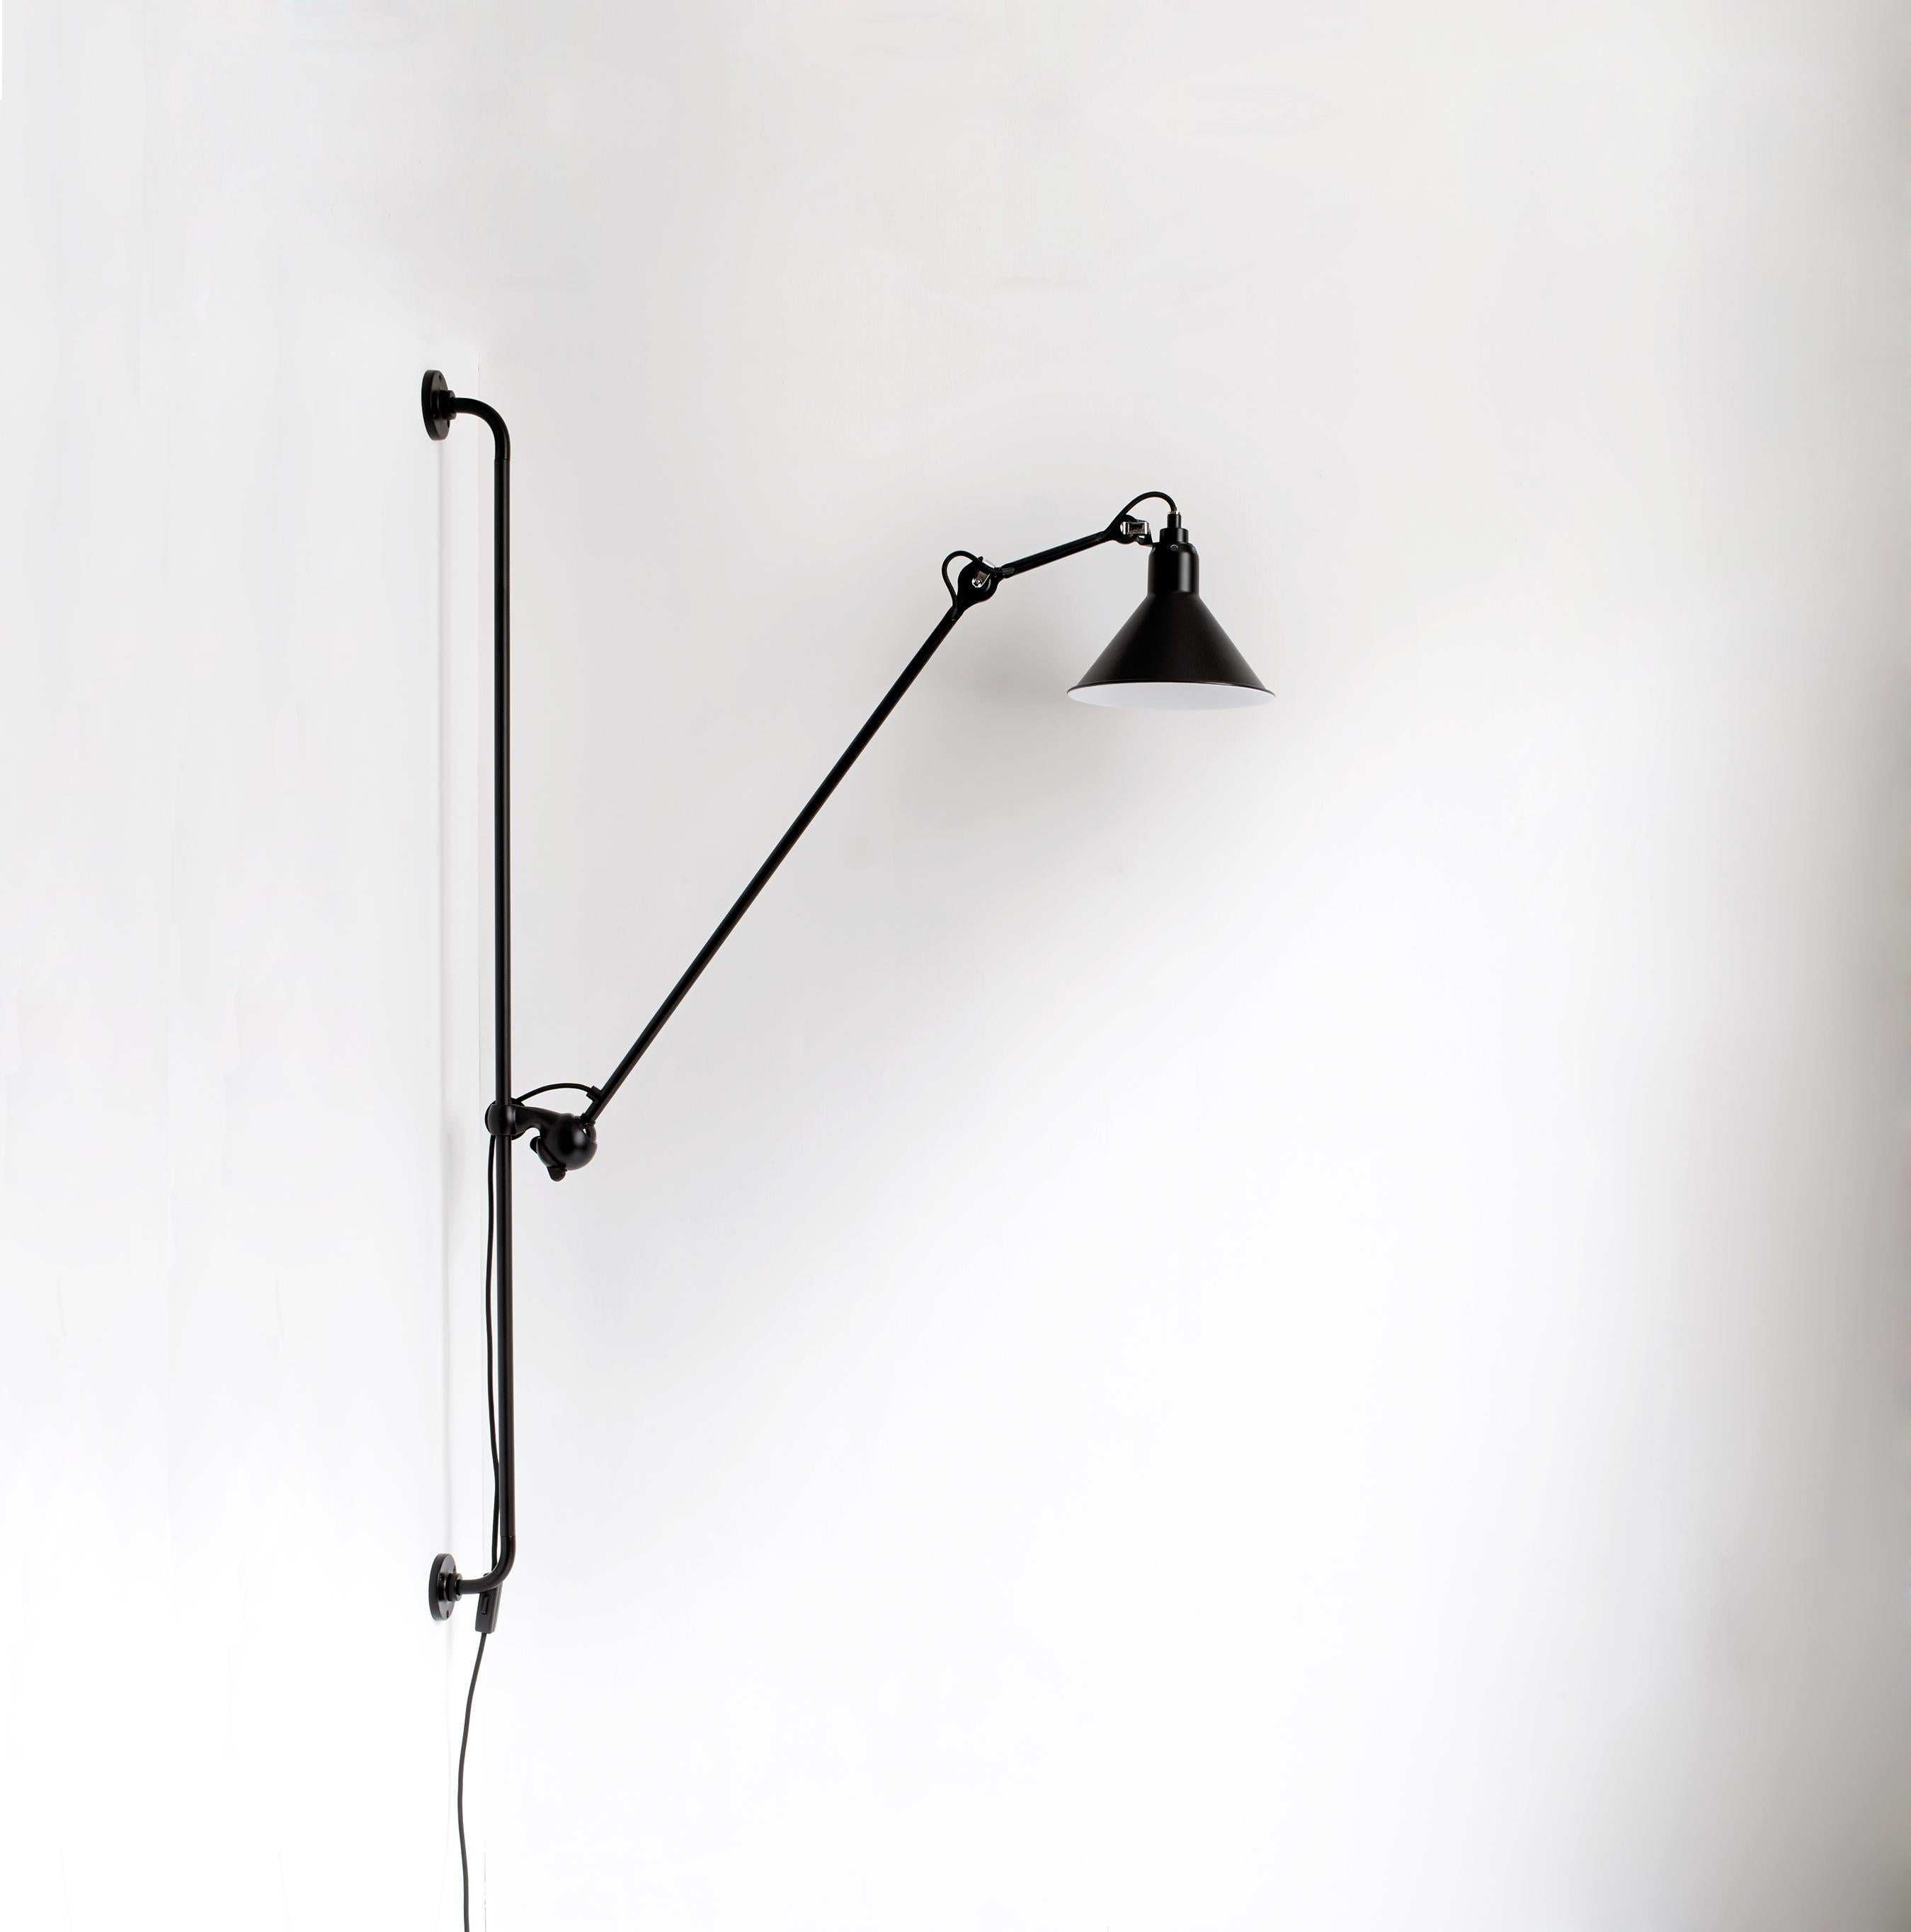 DCW Editions La Lampe Gras N°214 Conic Wall Lamp in Black Steel Arm and White Shade by Bernard-Albin Gras
 
 In 1921 Bernard-Albin GRAS designed a series of lamps for use in offices and in industrial environments. The GRAS lamp, as it was